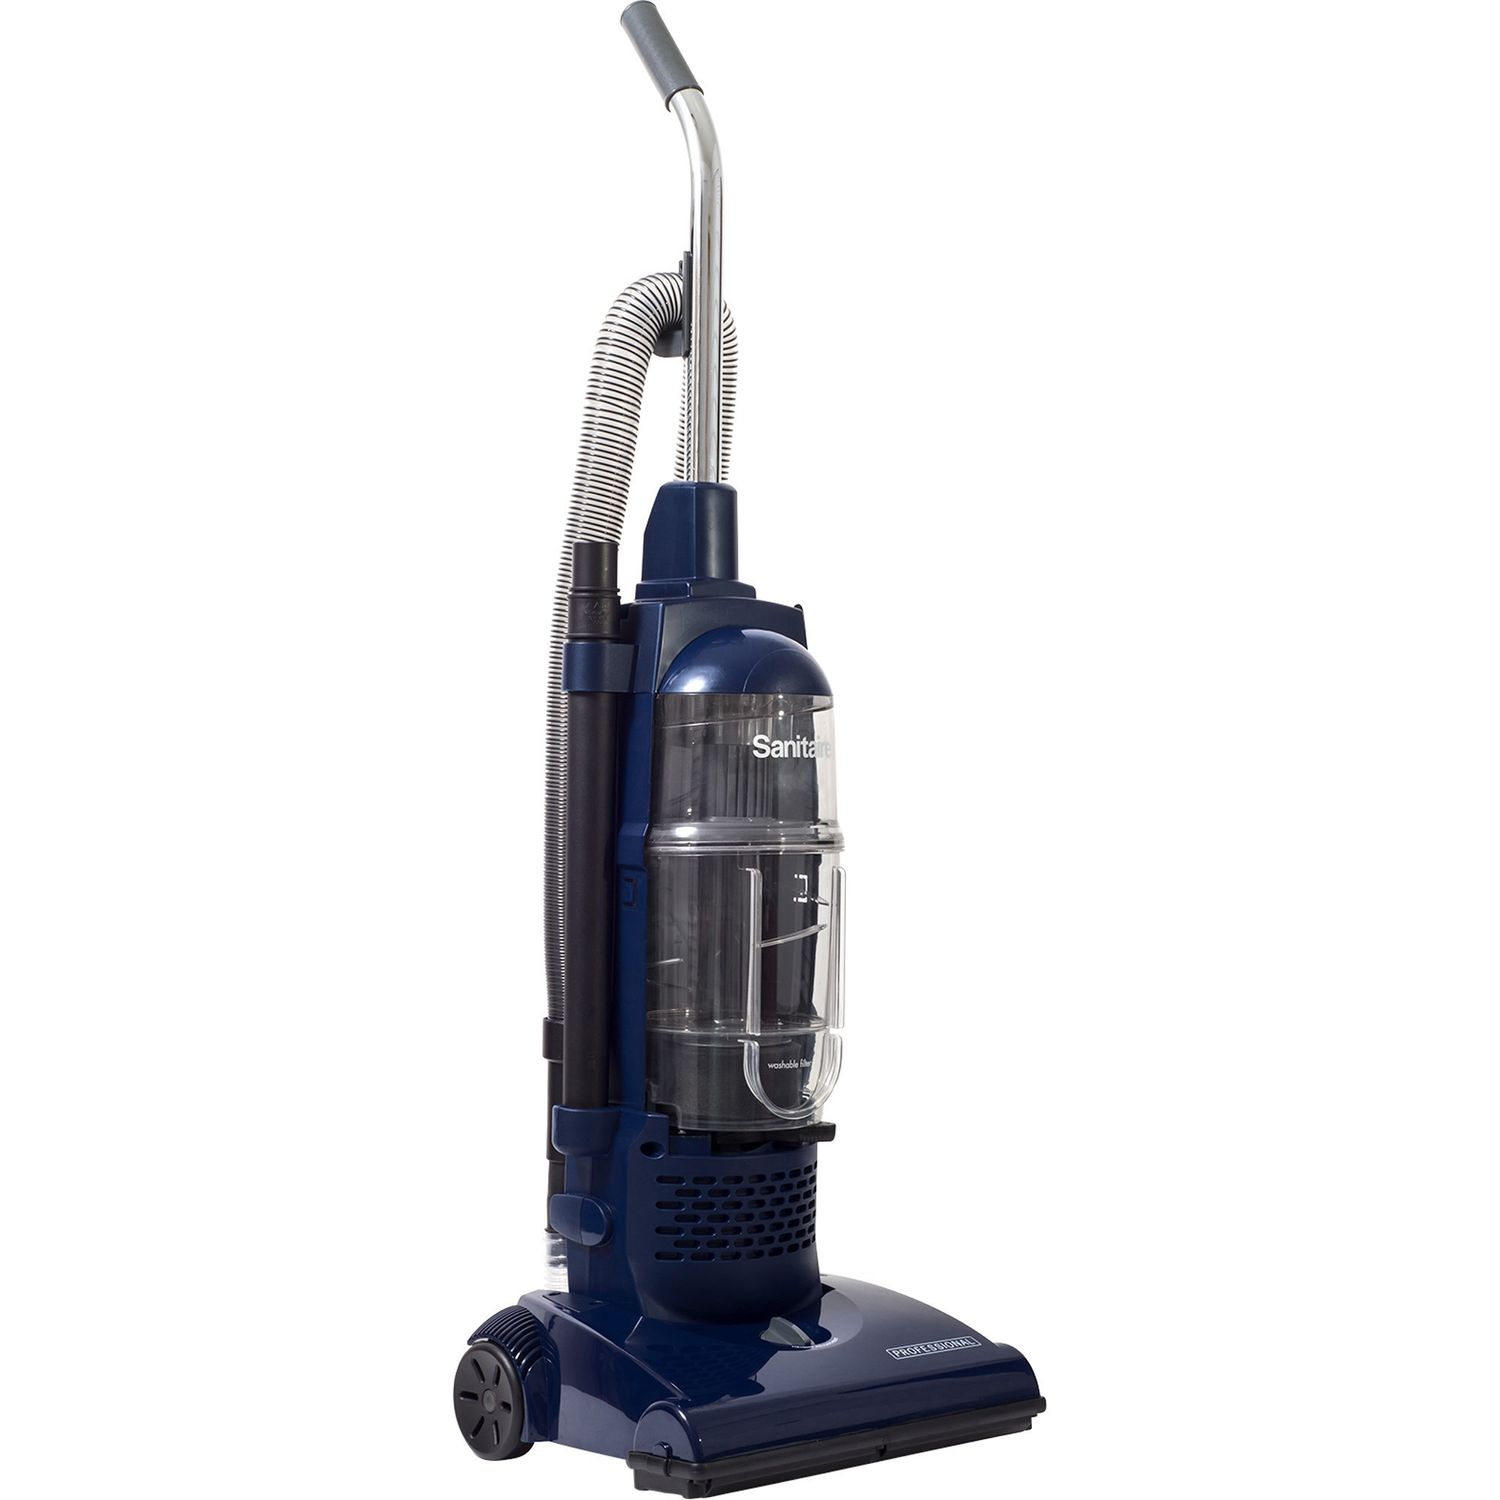 SL4410A Bagless Upright Vacuum 1 quart, Bagless, Crevice Tool, Dusting Brush, Upholstery Tool, Extension Wand, Nozzle, Brushroll, 13" Cleaning Width, 30 ft Cable Length, Cyclonic, 8 A, 80 dB(A) Noise